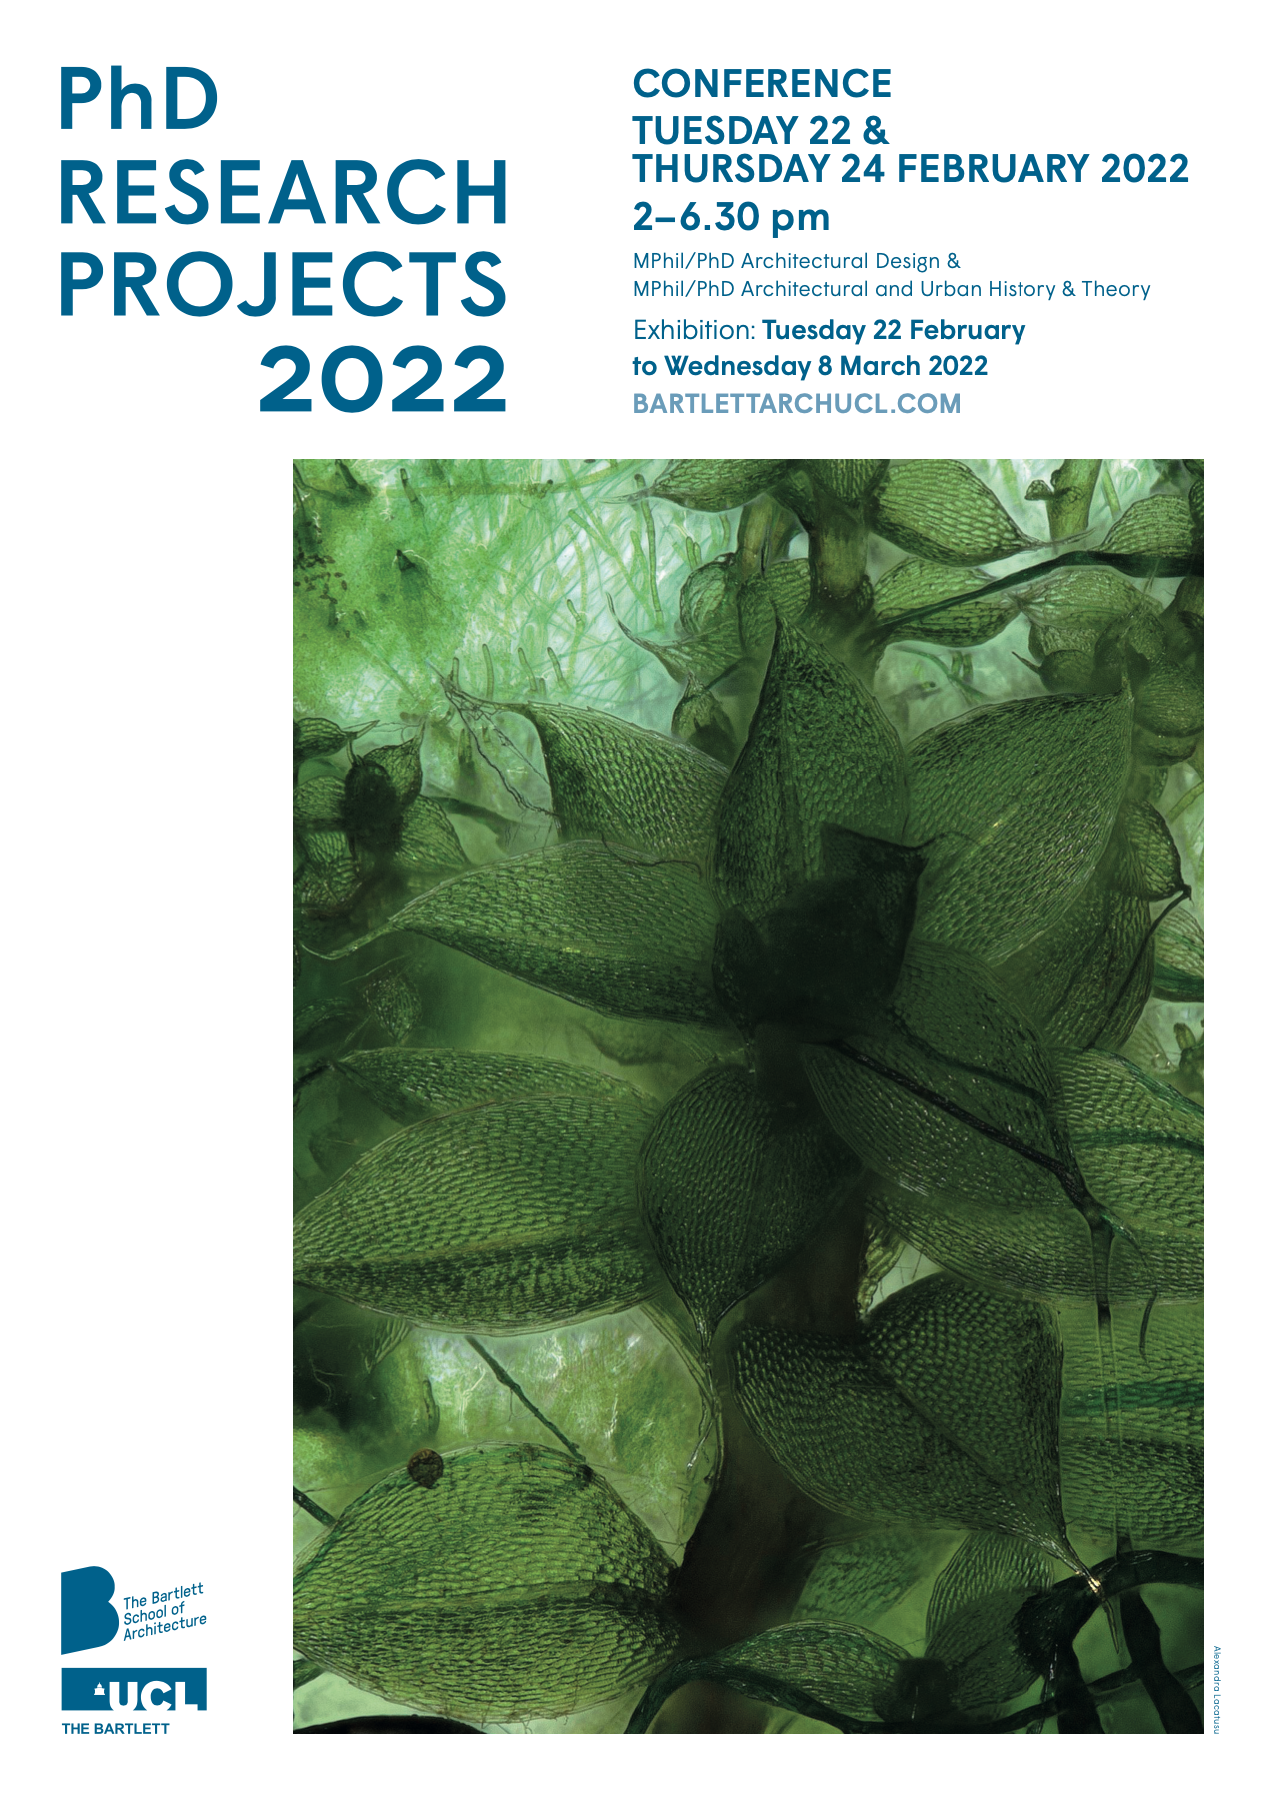 PhD Research Projects 2022